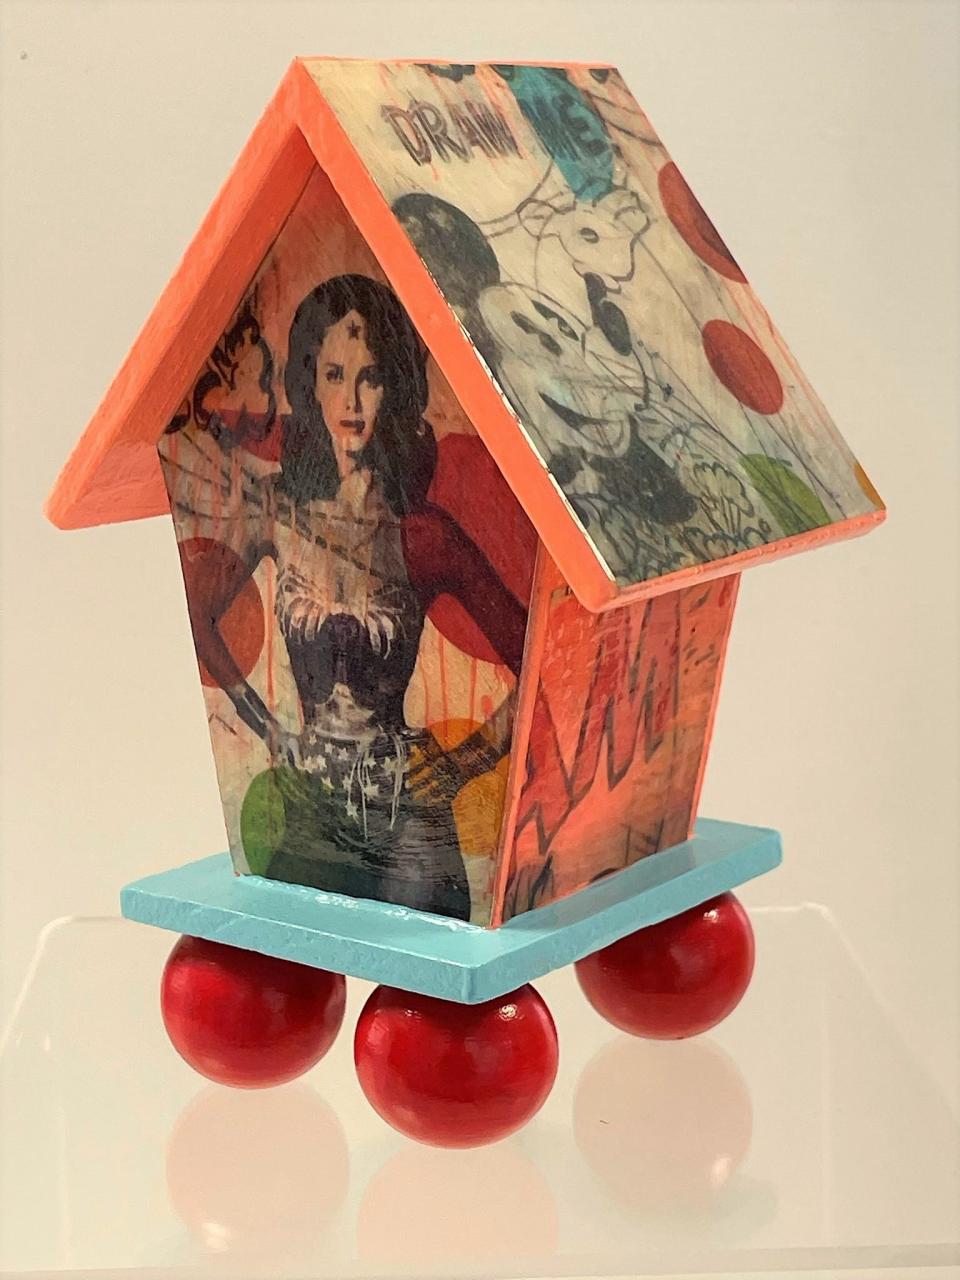 To celebrate Pride month and National Coming Out Day on Oct. 11, Location Gallery asked LGBTQIA+ artists from Savannah to contribute birdhouses to their Love Shax exhibition. This birdhouse was designed by Melody Postma.